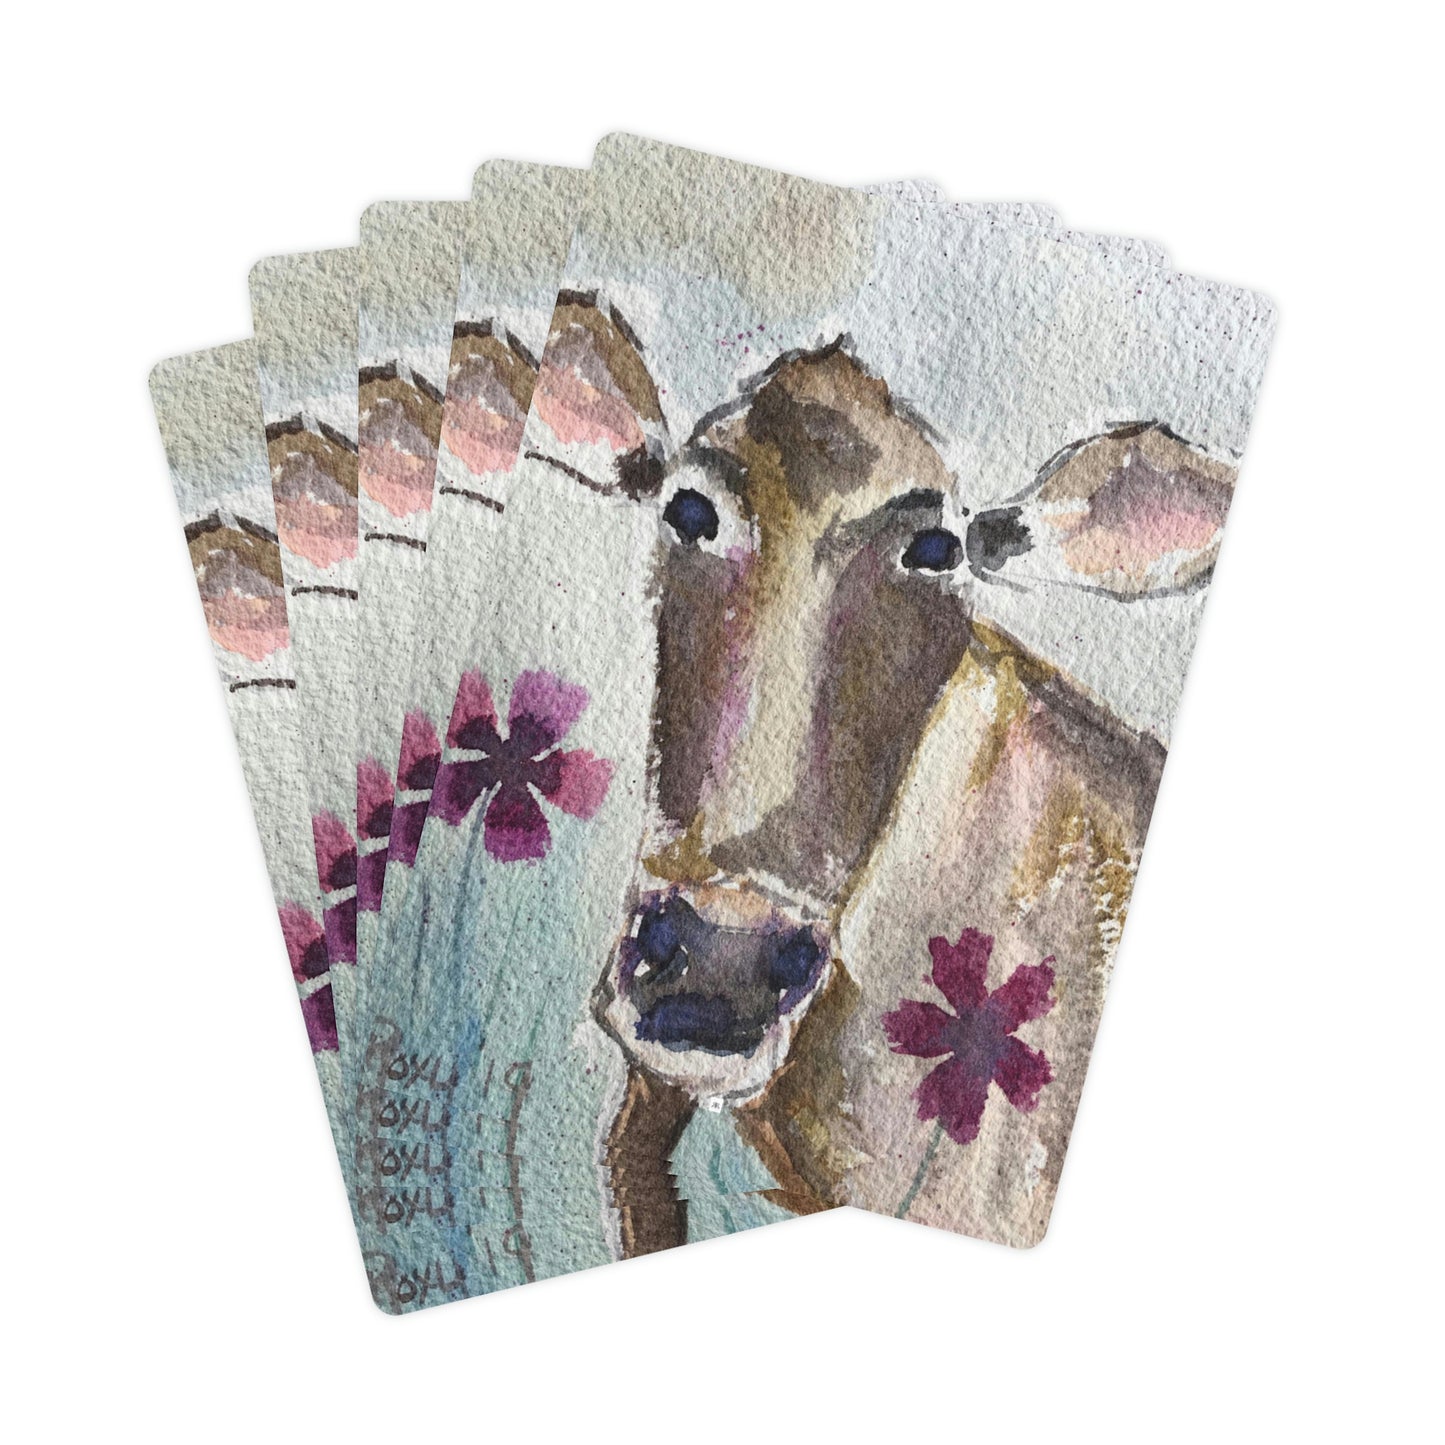 Petals -Whimsical Cow- Poker Cards/Playing Cards